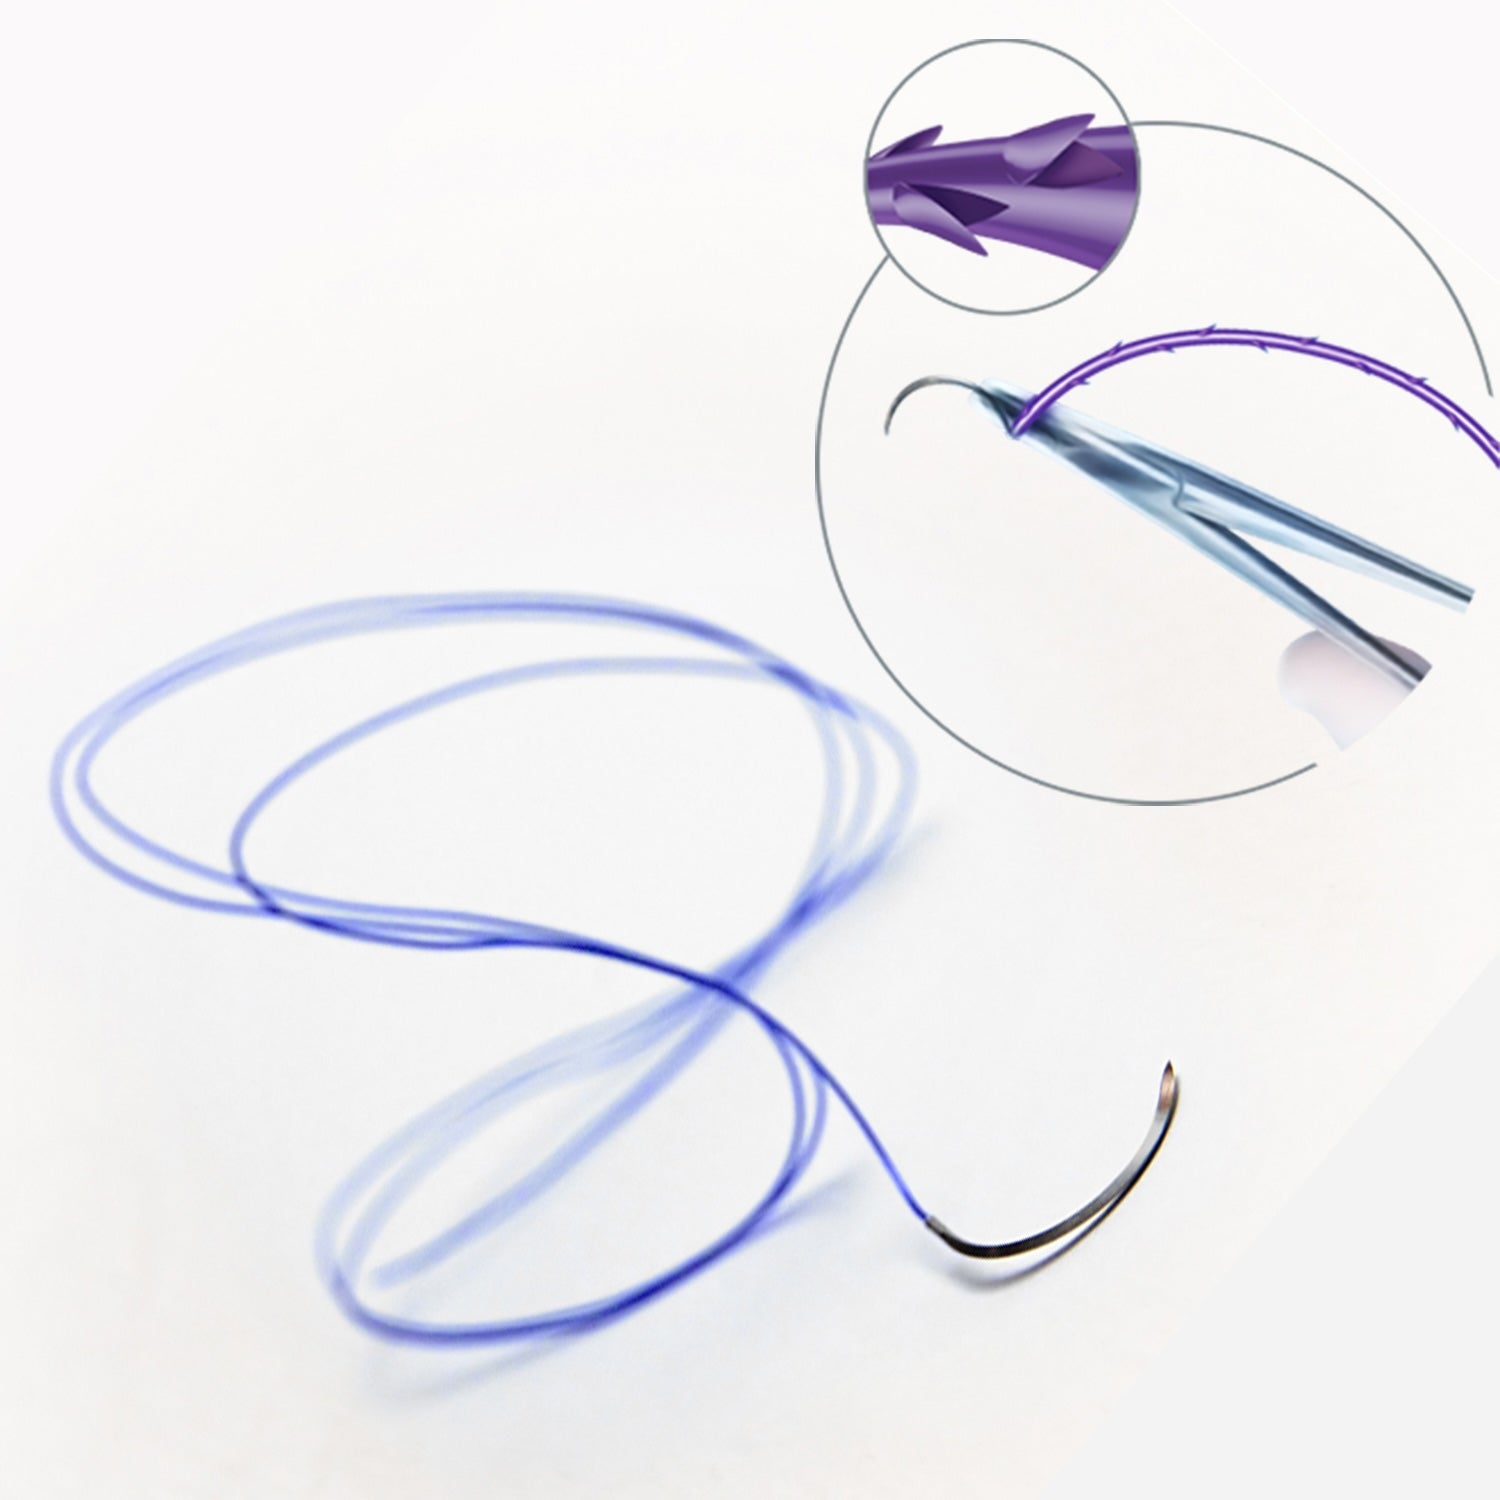 Ethicon Coated Vicryl Suture | Absorbable | Violet | Size: 1 | Length: 75cm | Needle: V-30 | Box of 12 (3)